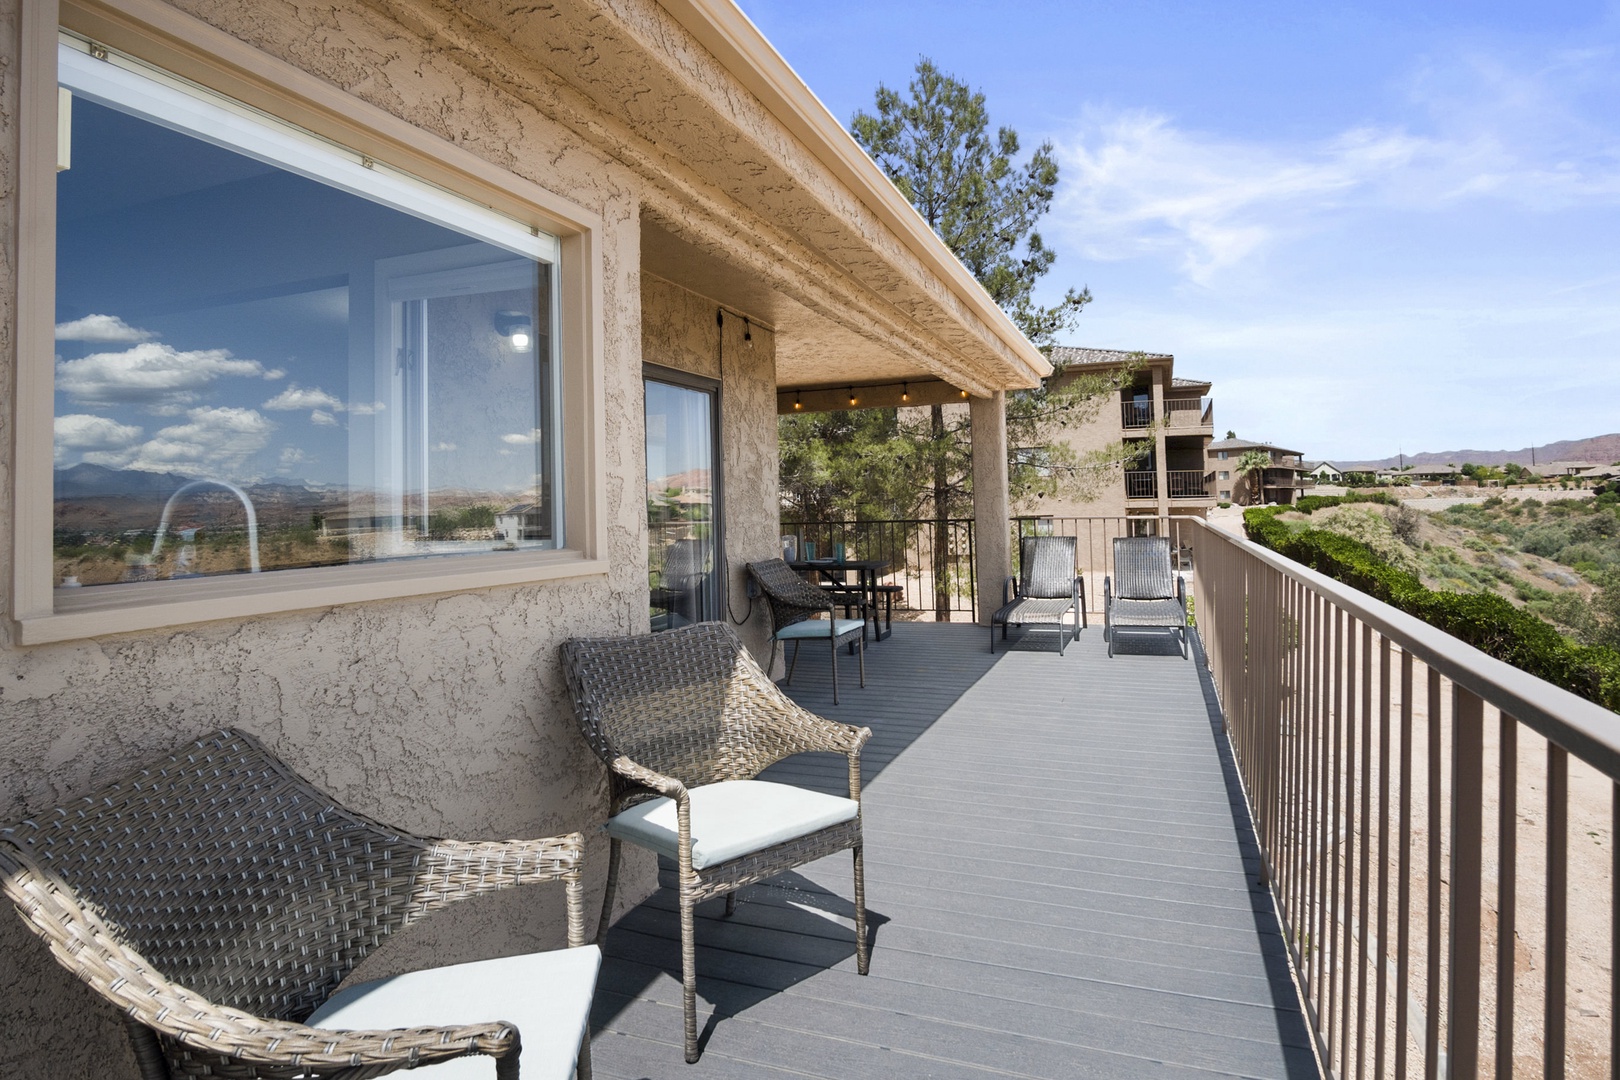 Outdoor seating in the patio with Long Range Views Year round seen from anywhere